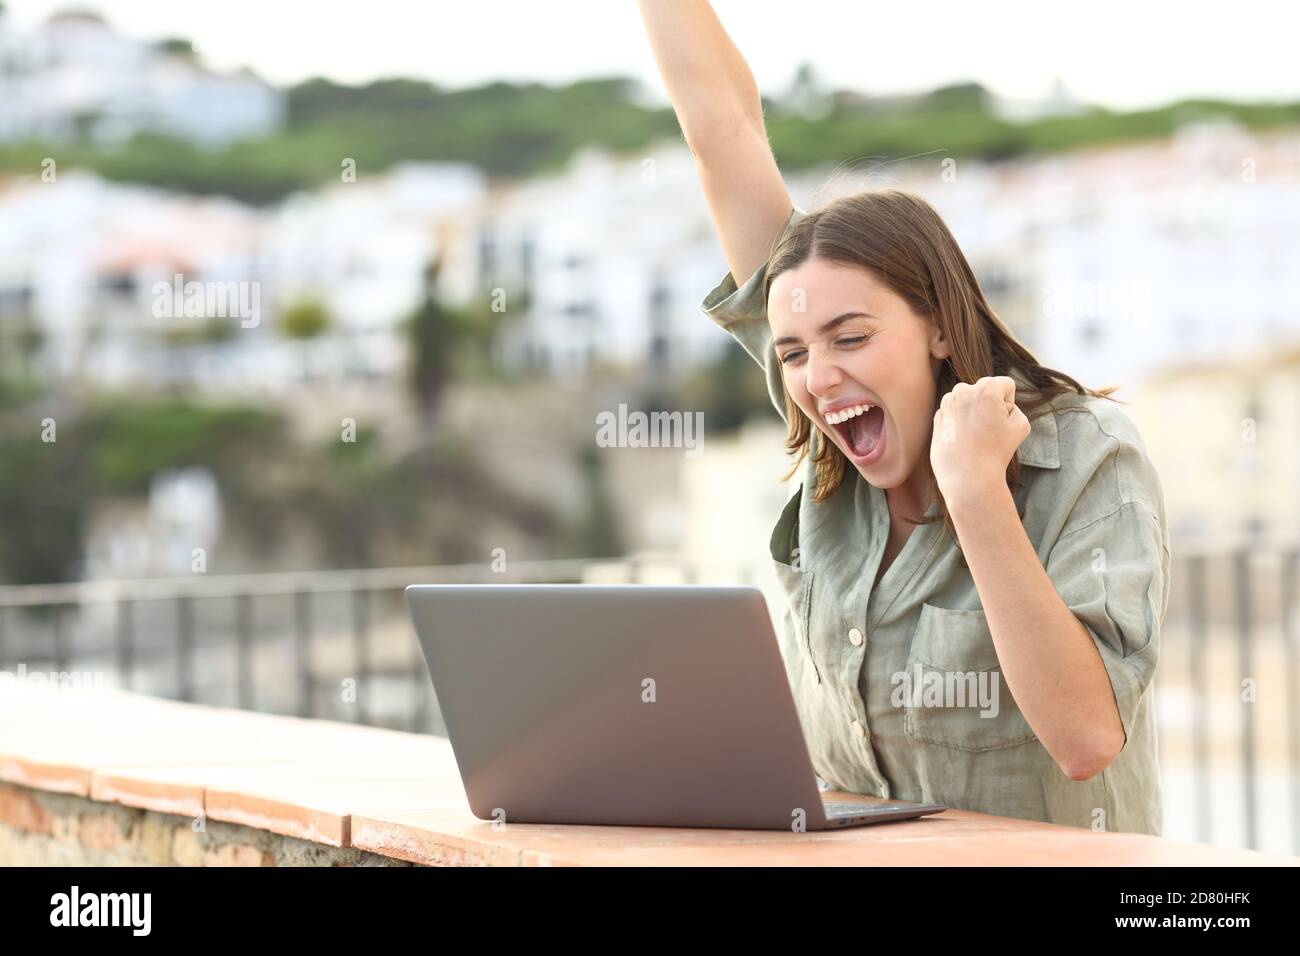 Excited woman celebrating good news checking laptop in a balcony in a town on vacation Stock Photo